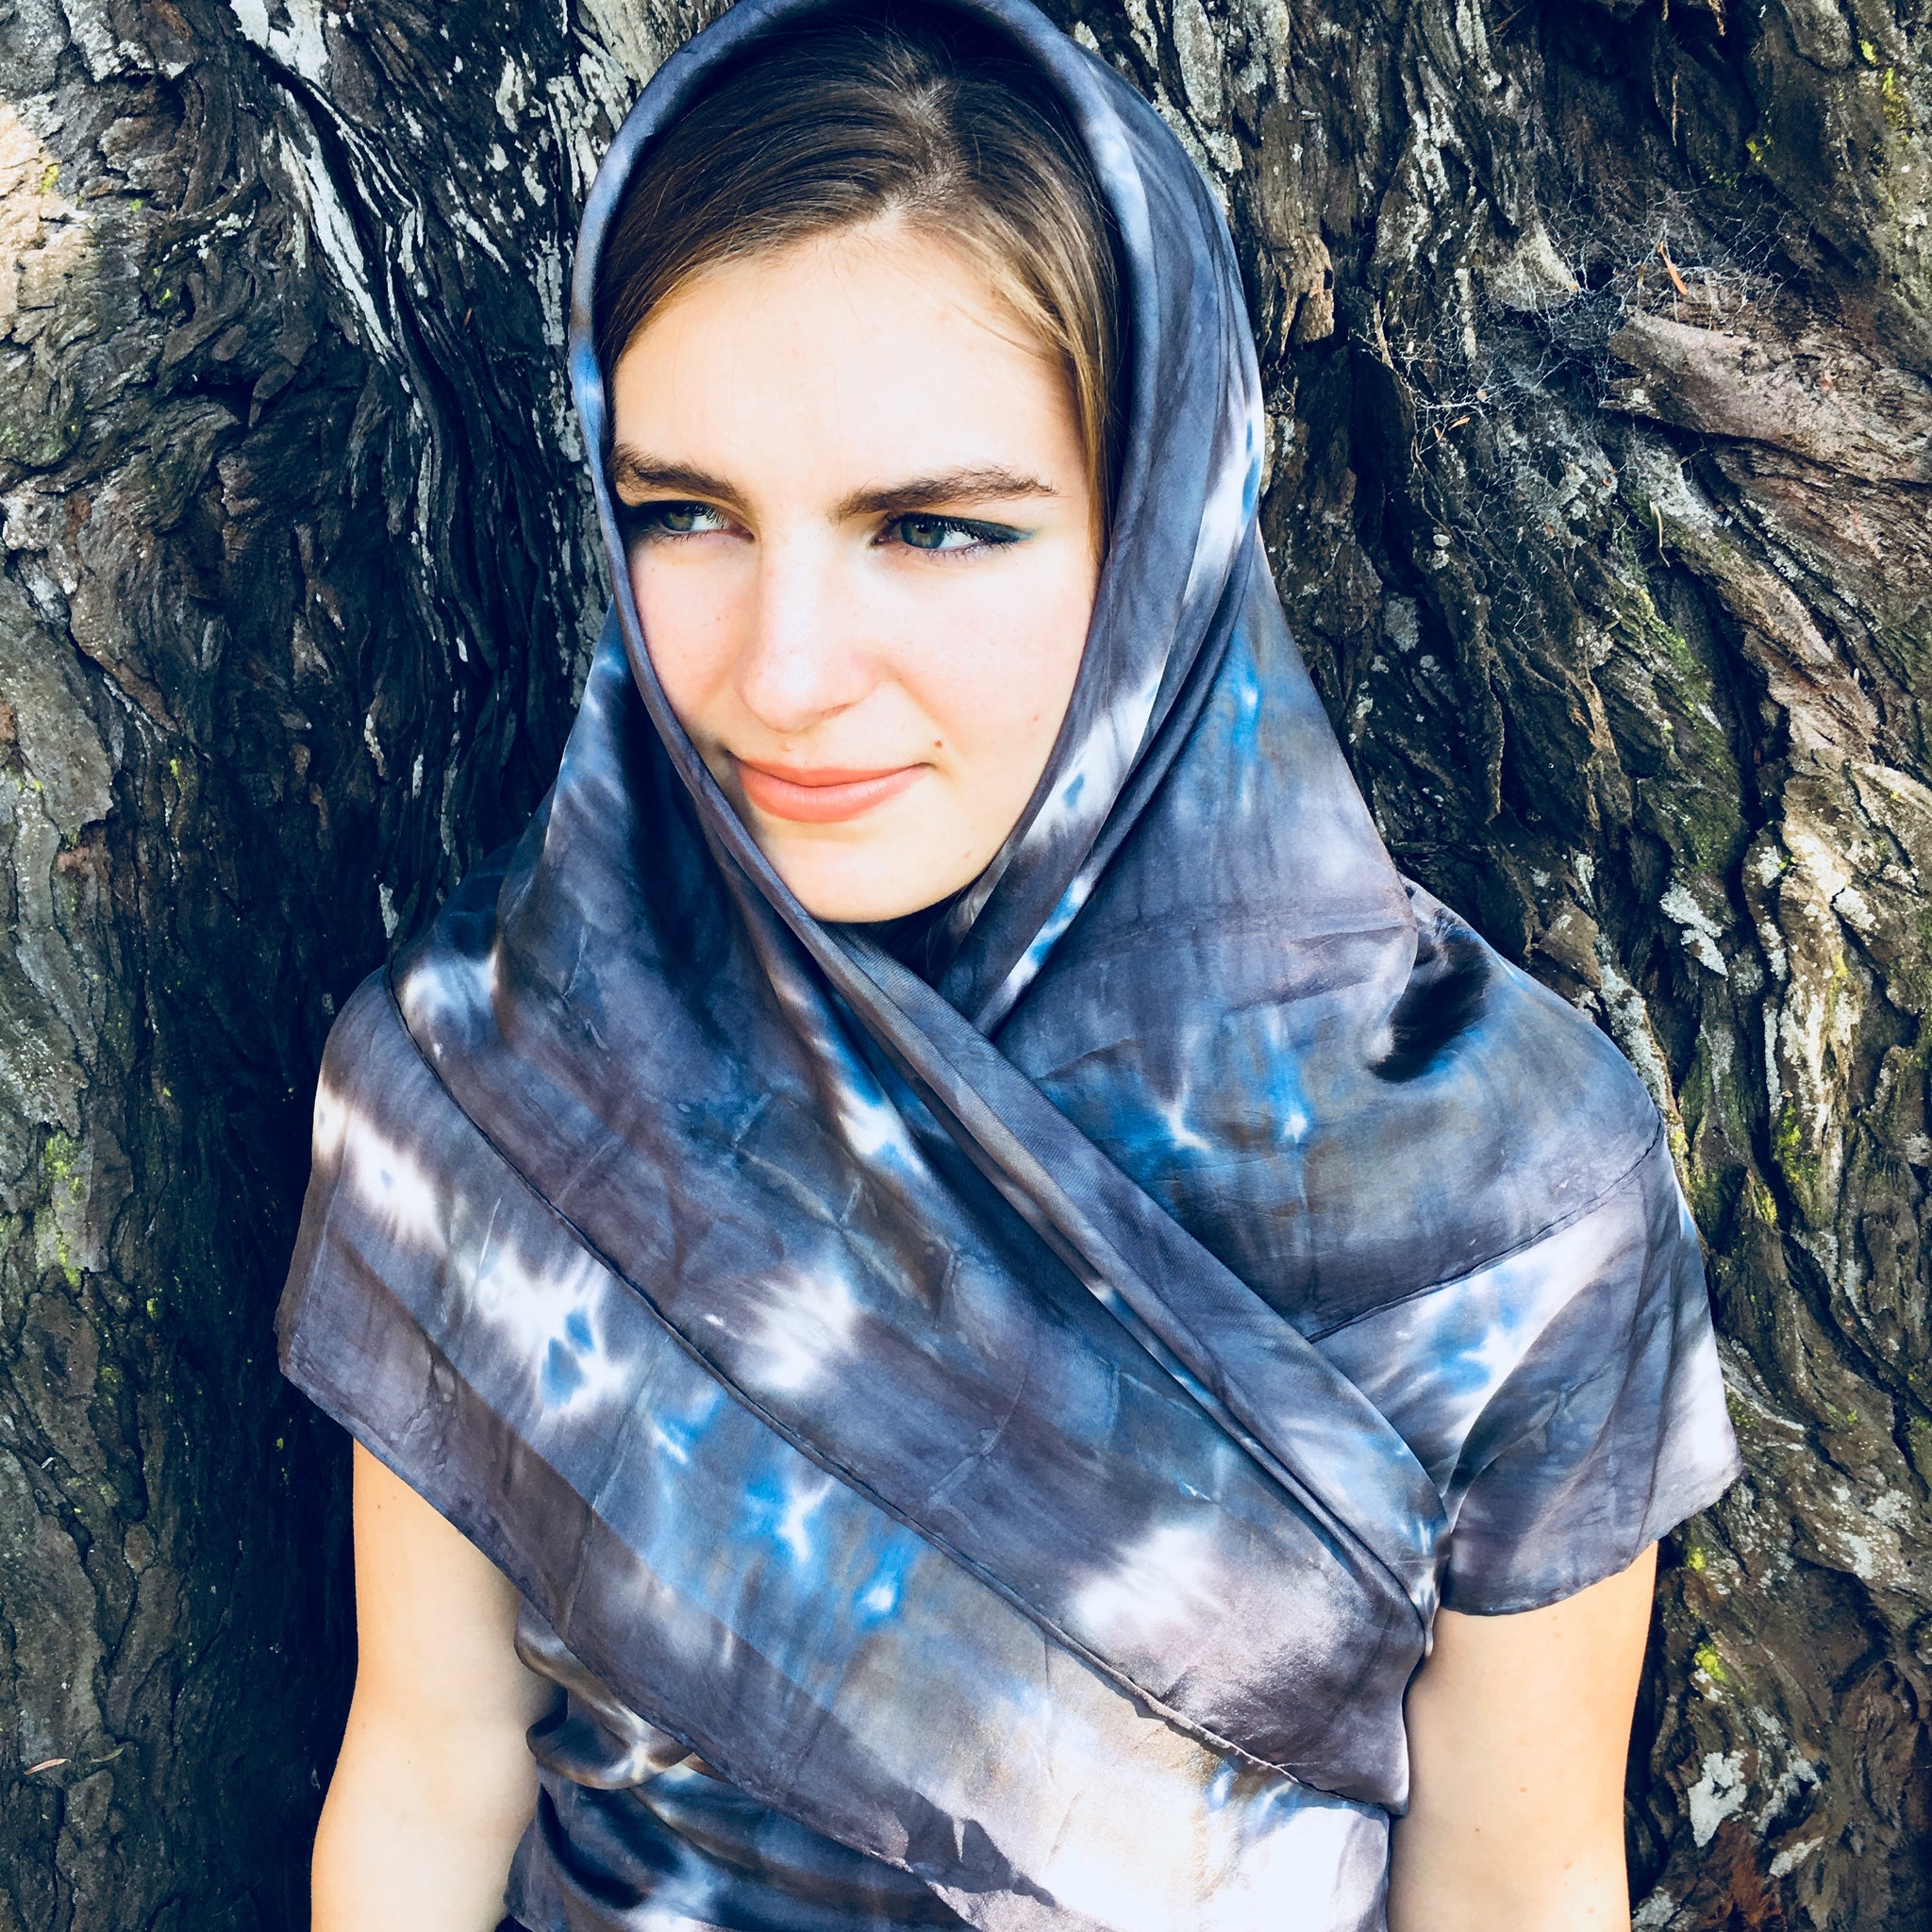 Model is wearing a black charcoal and blue large luxury silk square scarf as a hijab around head, sustainable wear with many style looks. Best fashion accessory for any season or occasion. Makes a great gift. Handmade one of a kind artisan accessories. Square shaped 43 inches by 43 inches.